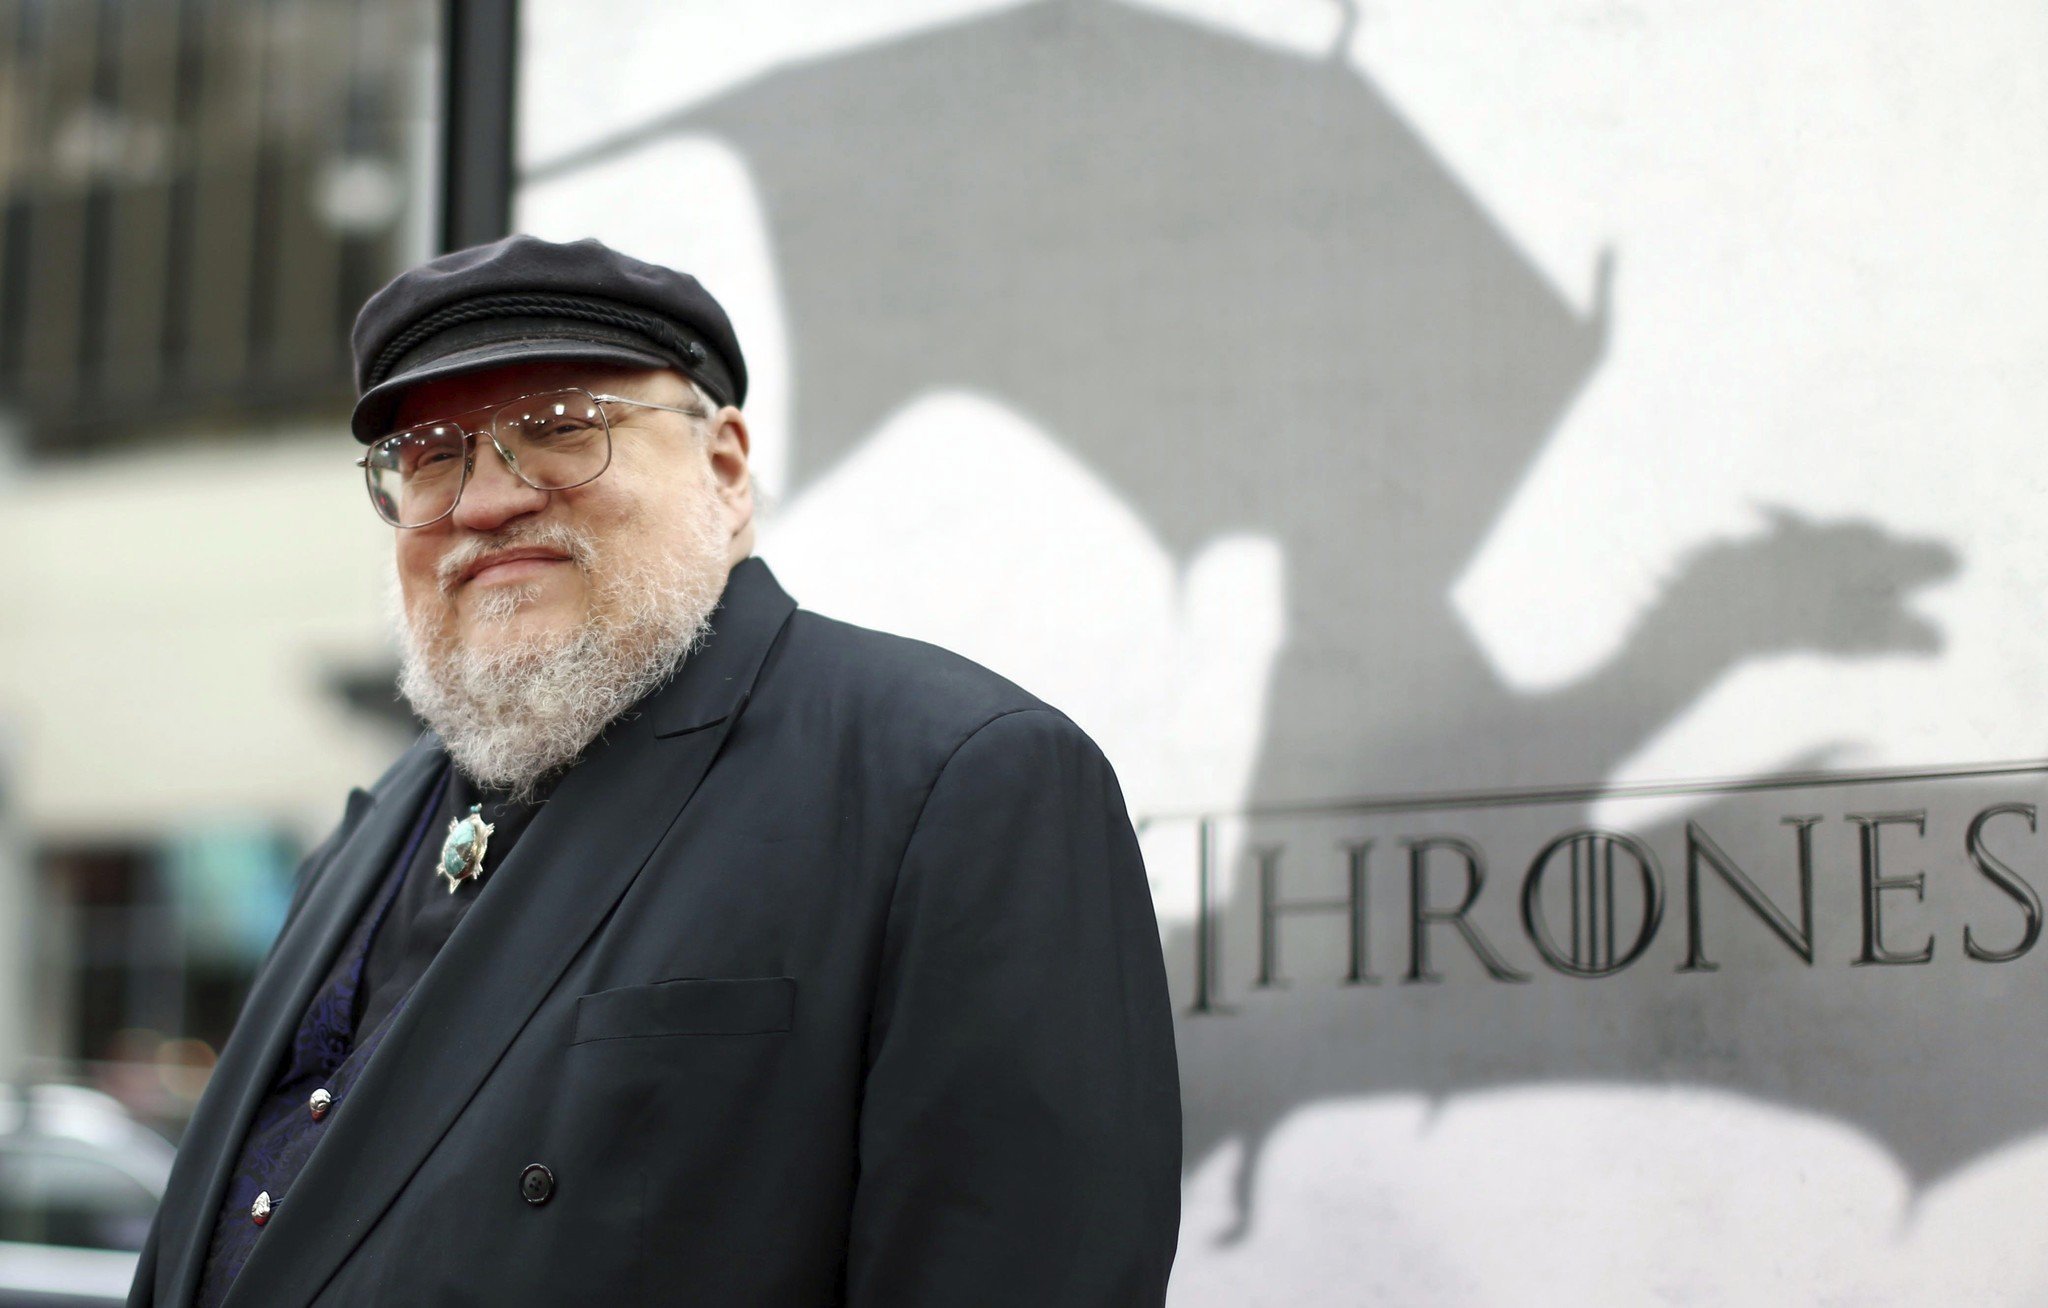 George R.R. Martin "Game of Thrones"